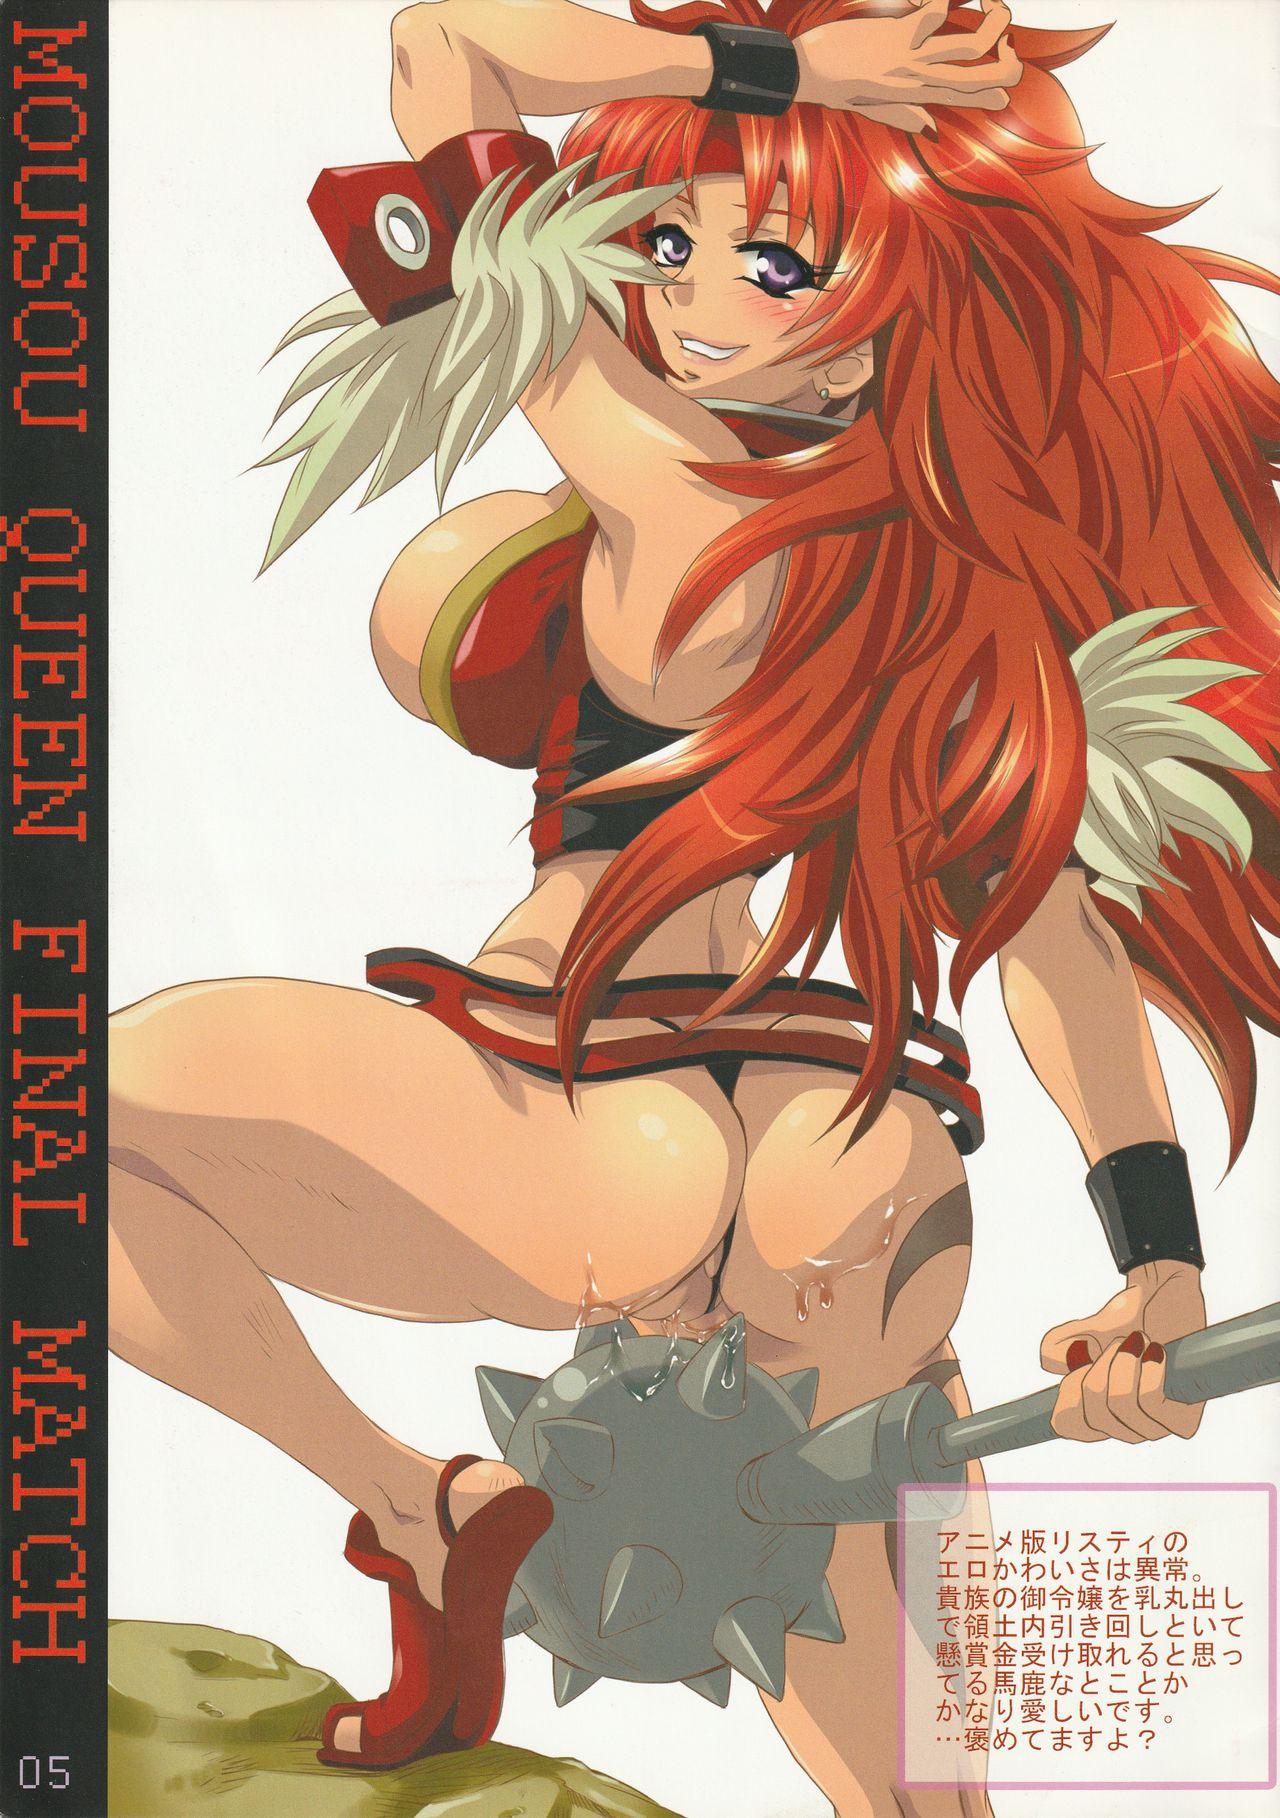 Wives Mousou Oujo Kettei Sen - Queens blade Extreme - Page 5